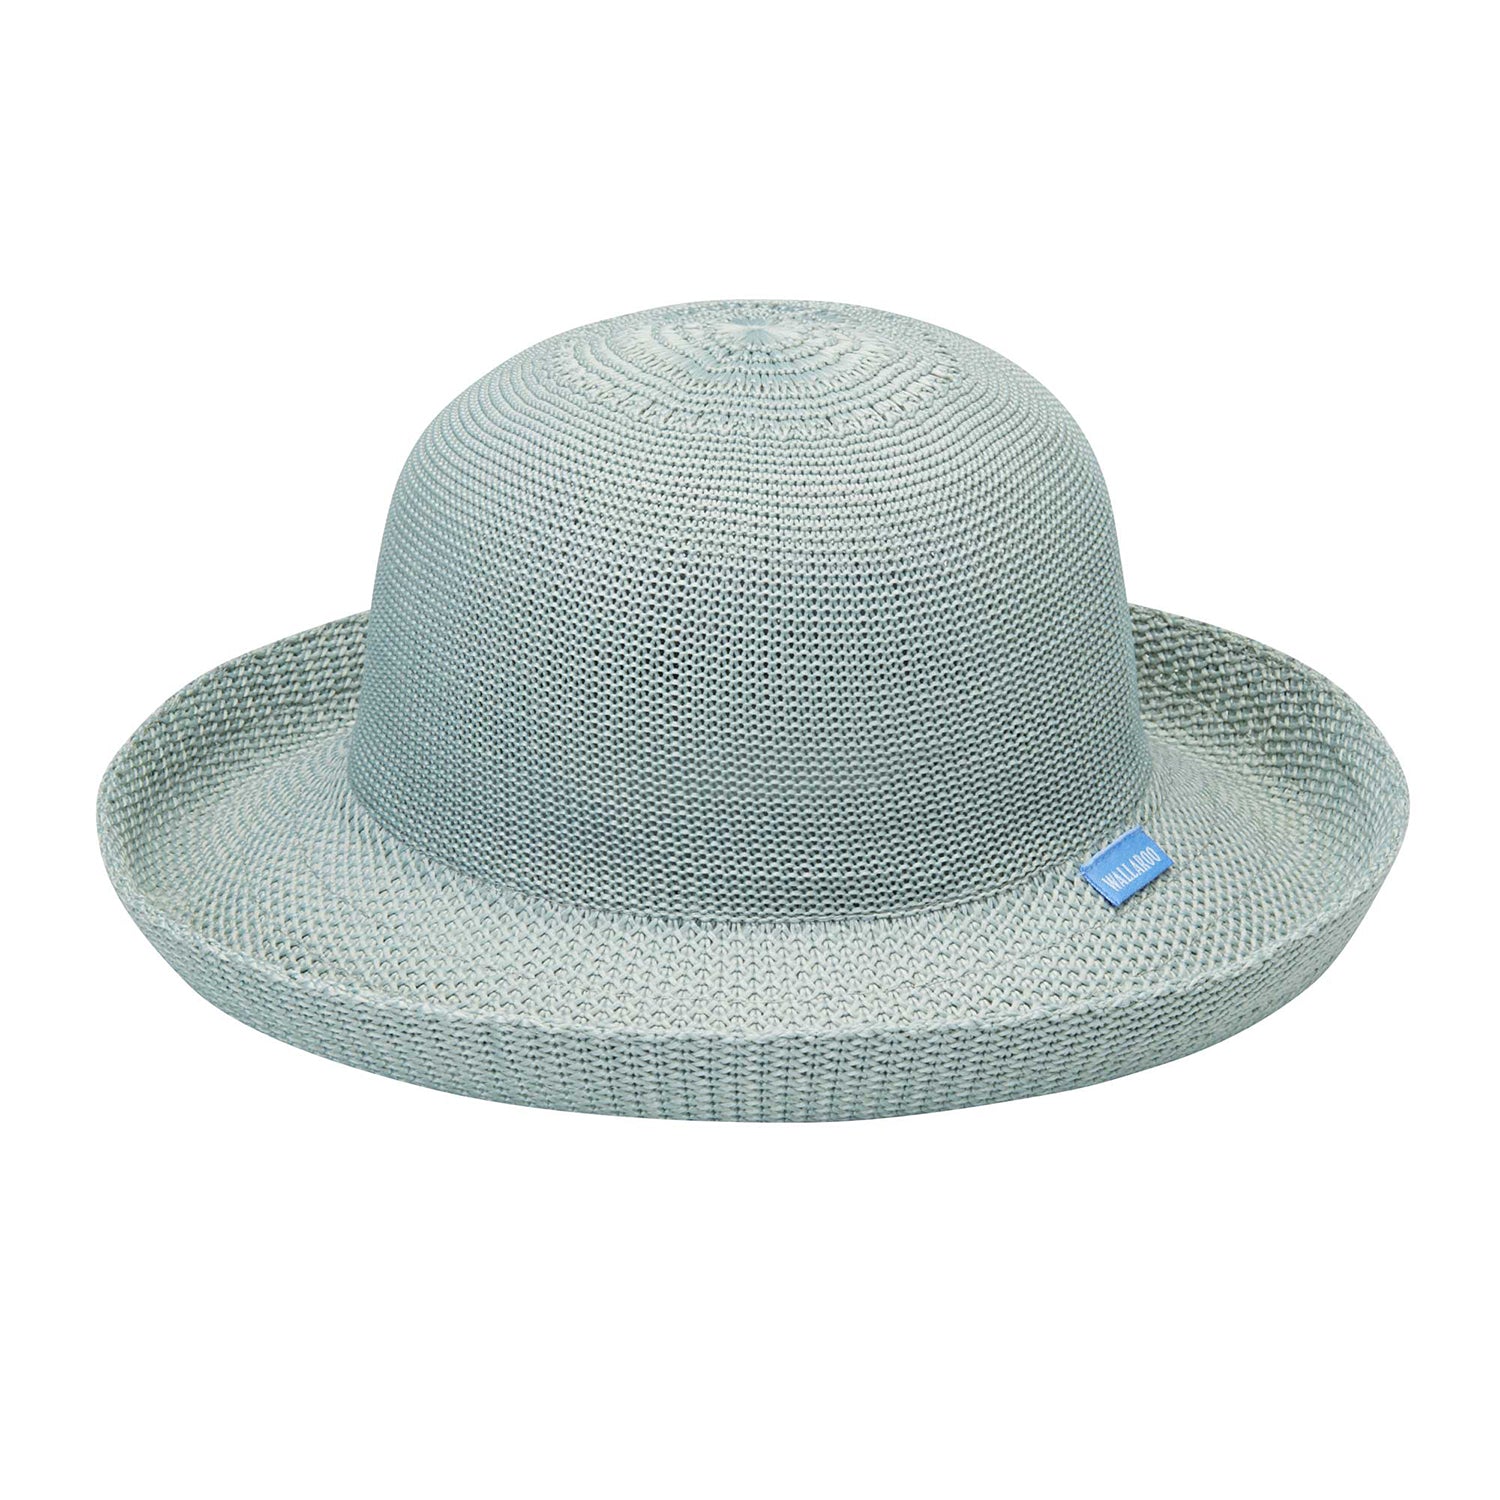 Featuring Petite Victoria crown style sun hat with upturned brim by Wallaroo